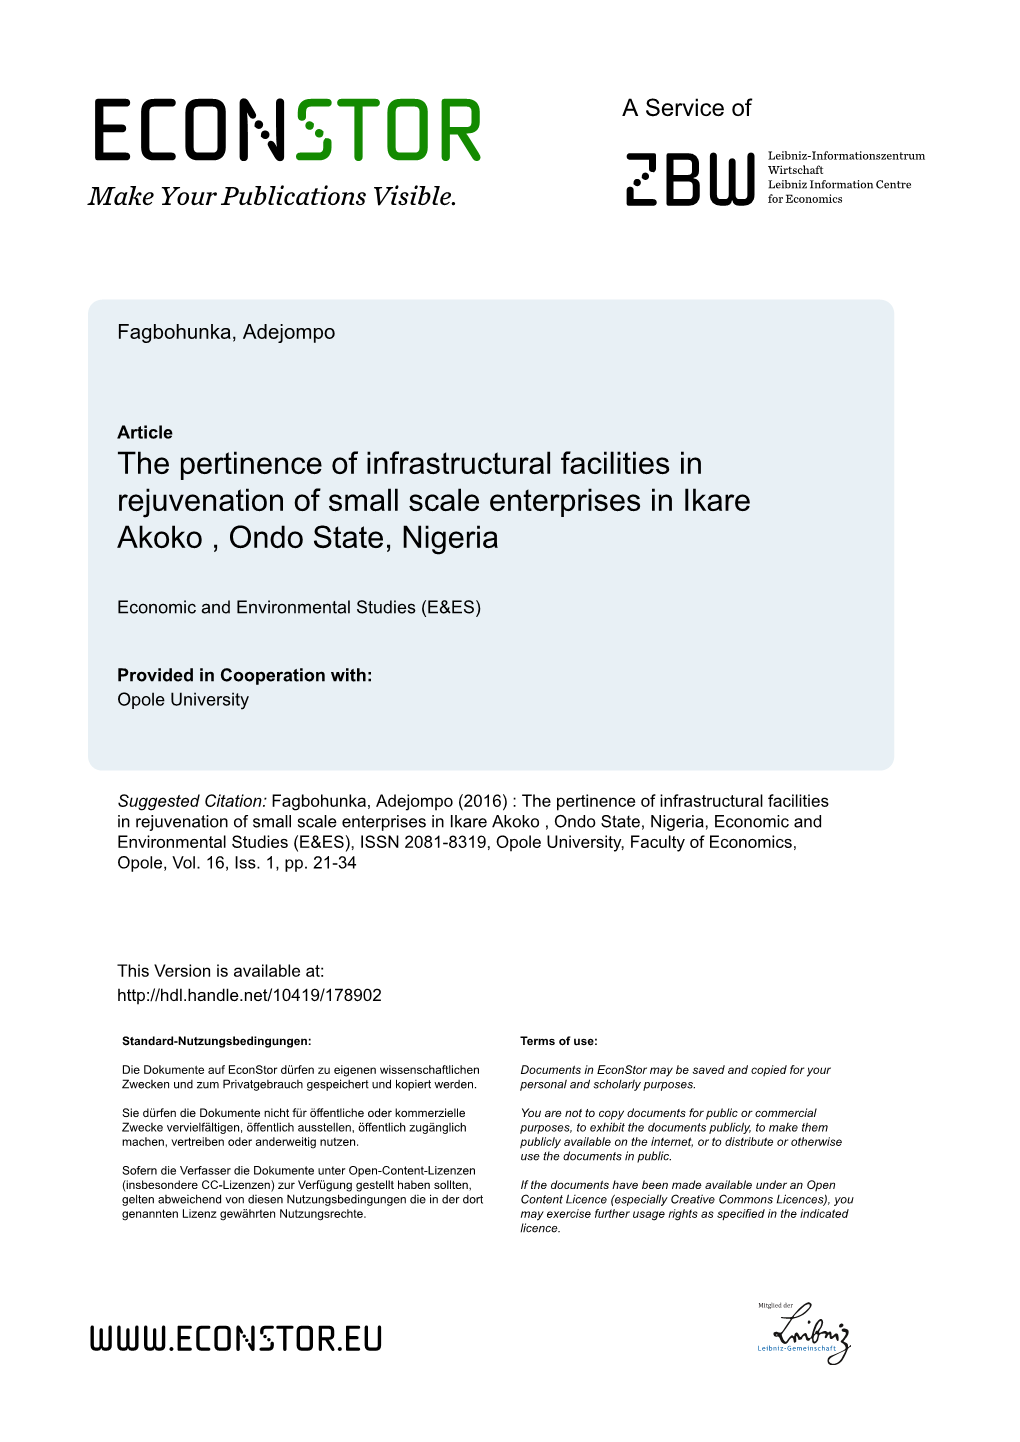 The Pertinence of Infrastructural Facilities in Rejuvenation of Small Scale Enterprises in Ikare Akoko , Ondo State, Nigeria